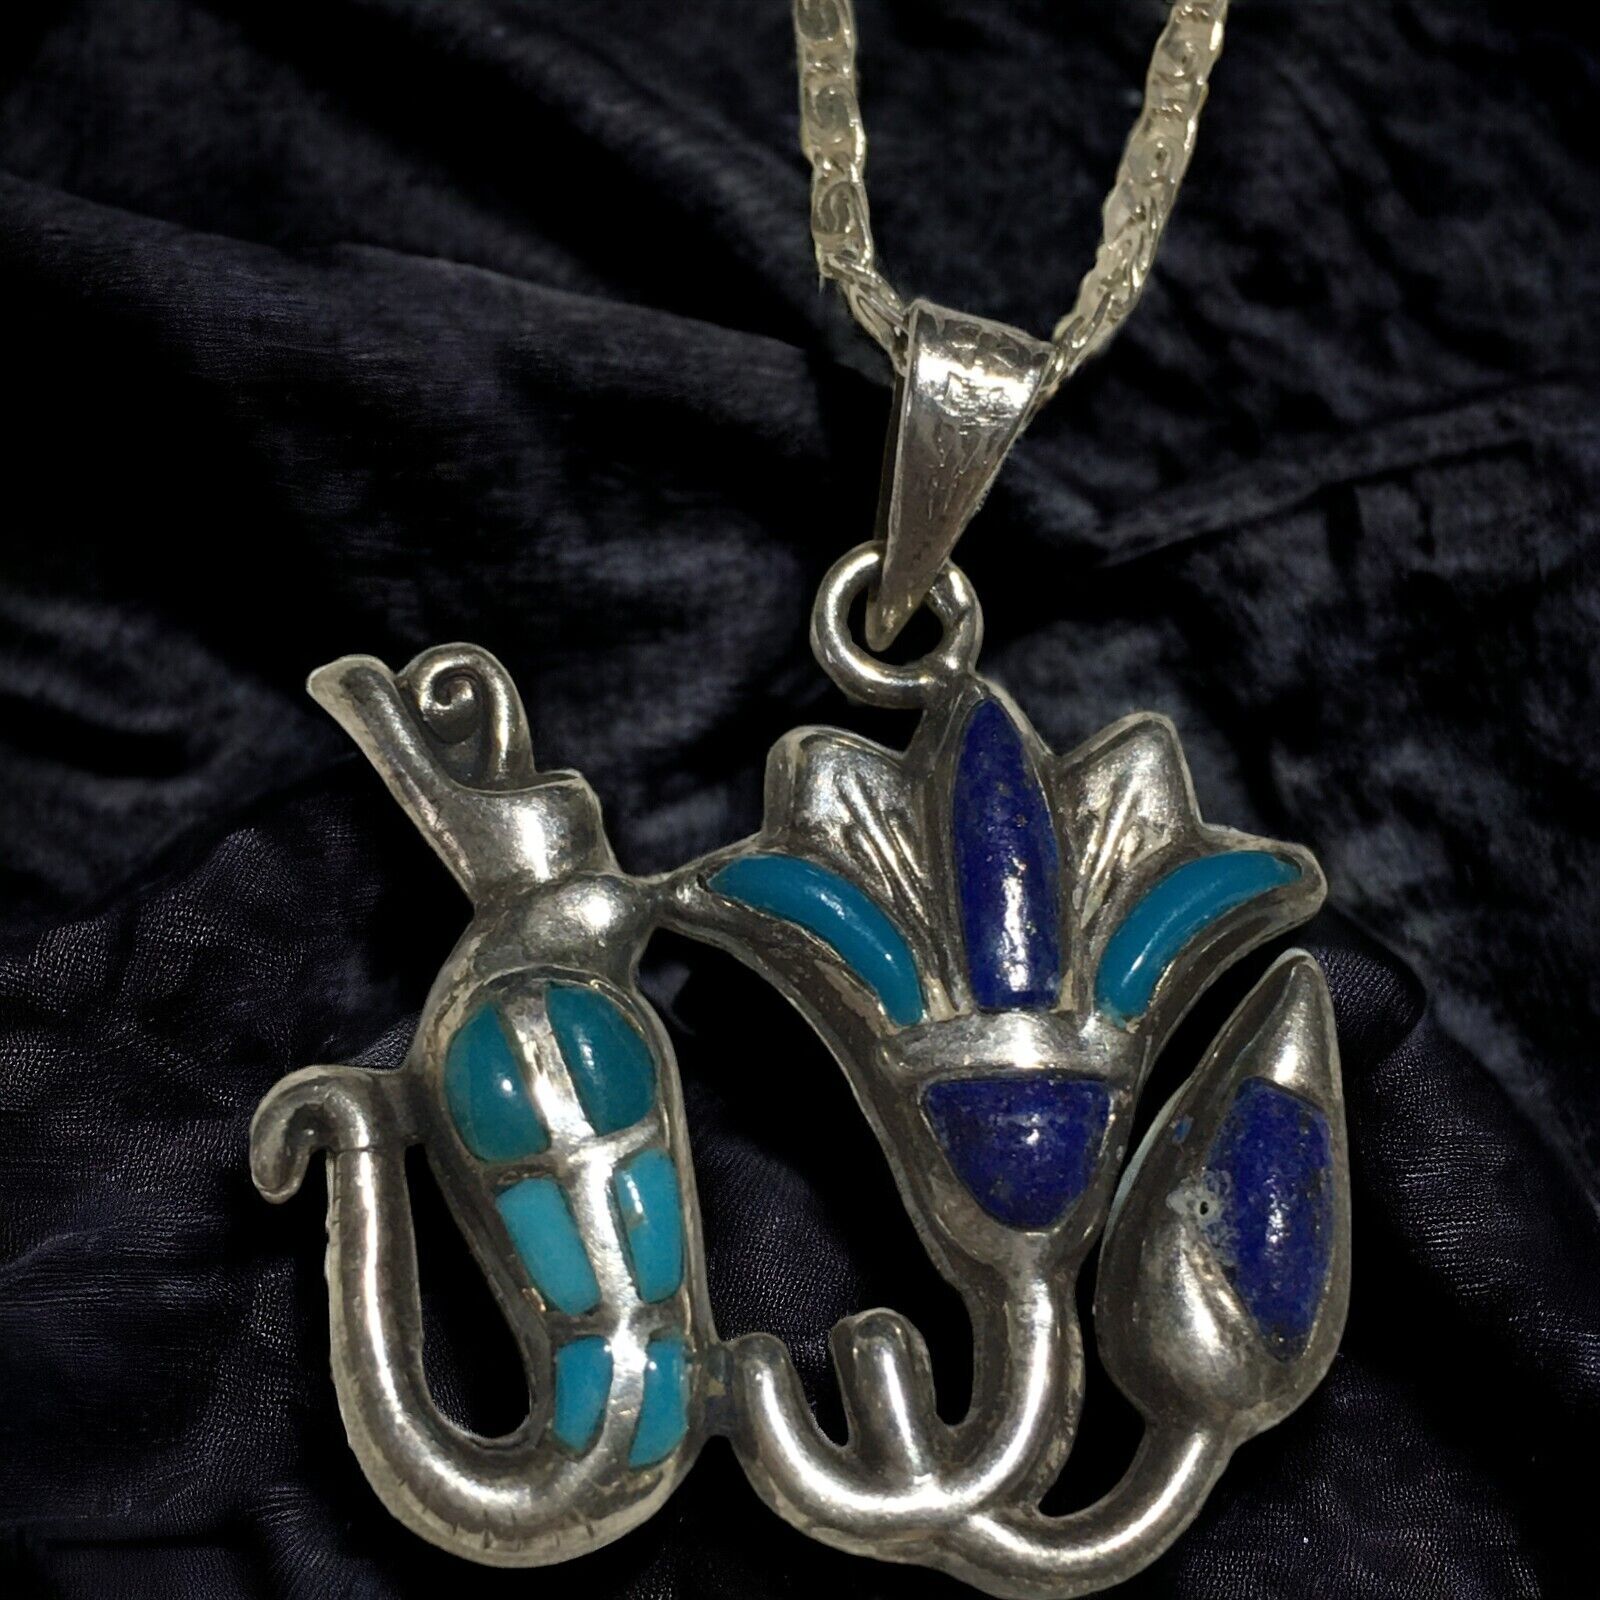 Exquisite Egyptian Lotus Flower Silver Necklace: Antique Pharaonic Jewelry